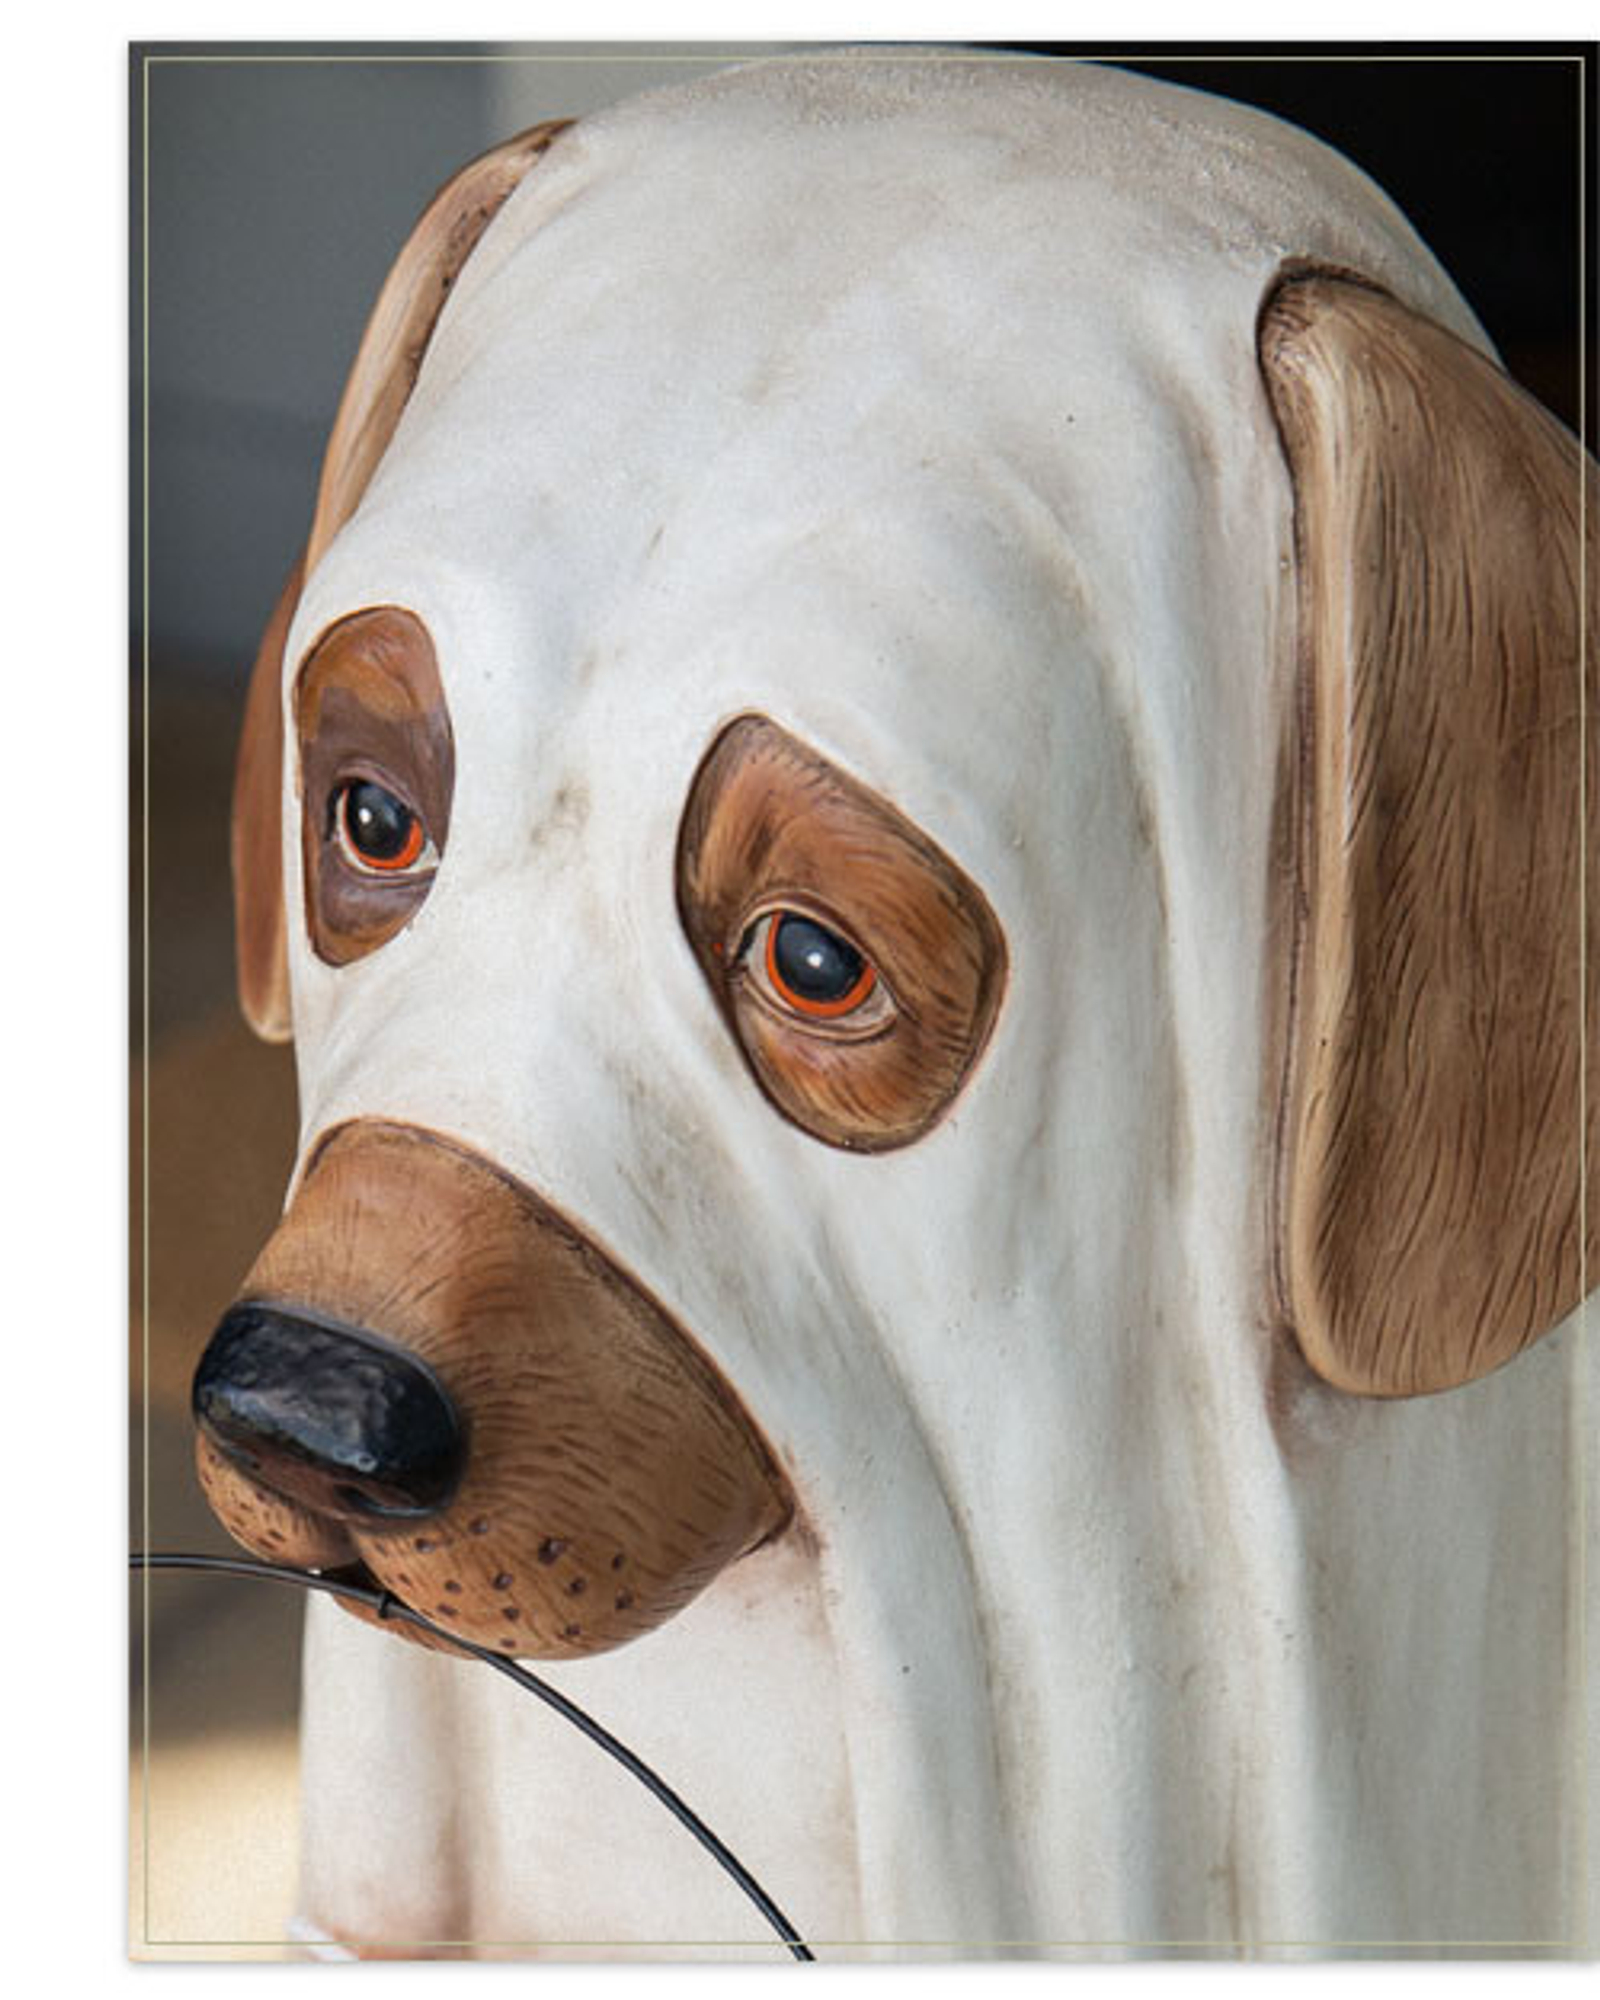 https://source.widen.net/content/t2io1tnfjl/jpeg/4002354_Outdoor-Life-Size-Ghost-Dog-Candy-Bowl_PDP.jpeg?w=1600&h=2000&keep=c&crop=yes&color=cccccc&quality=100&u=7mzq6p